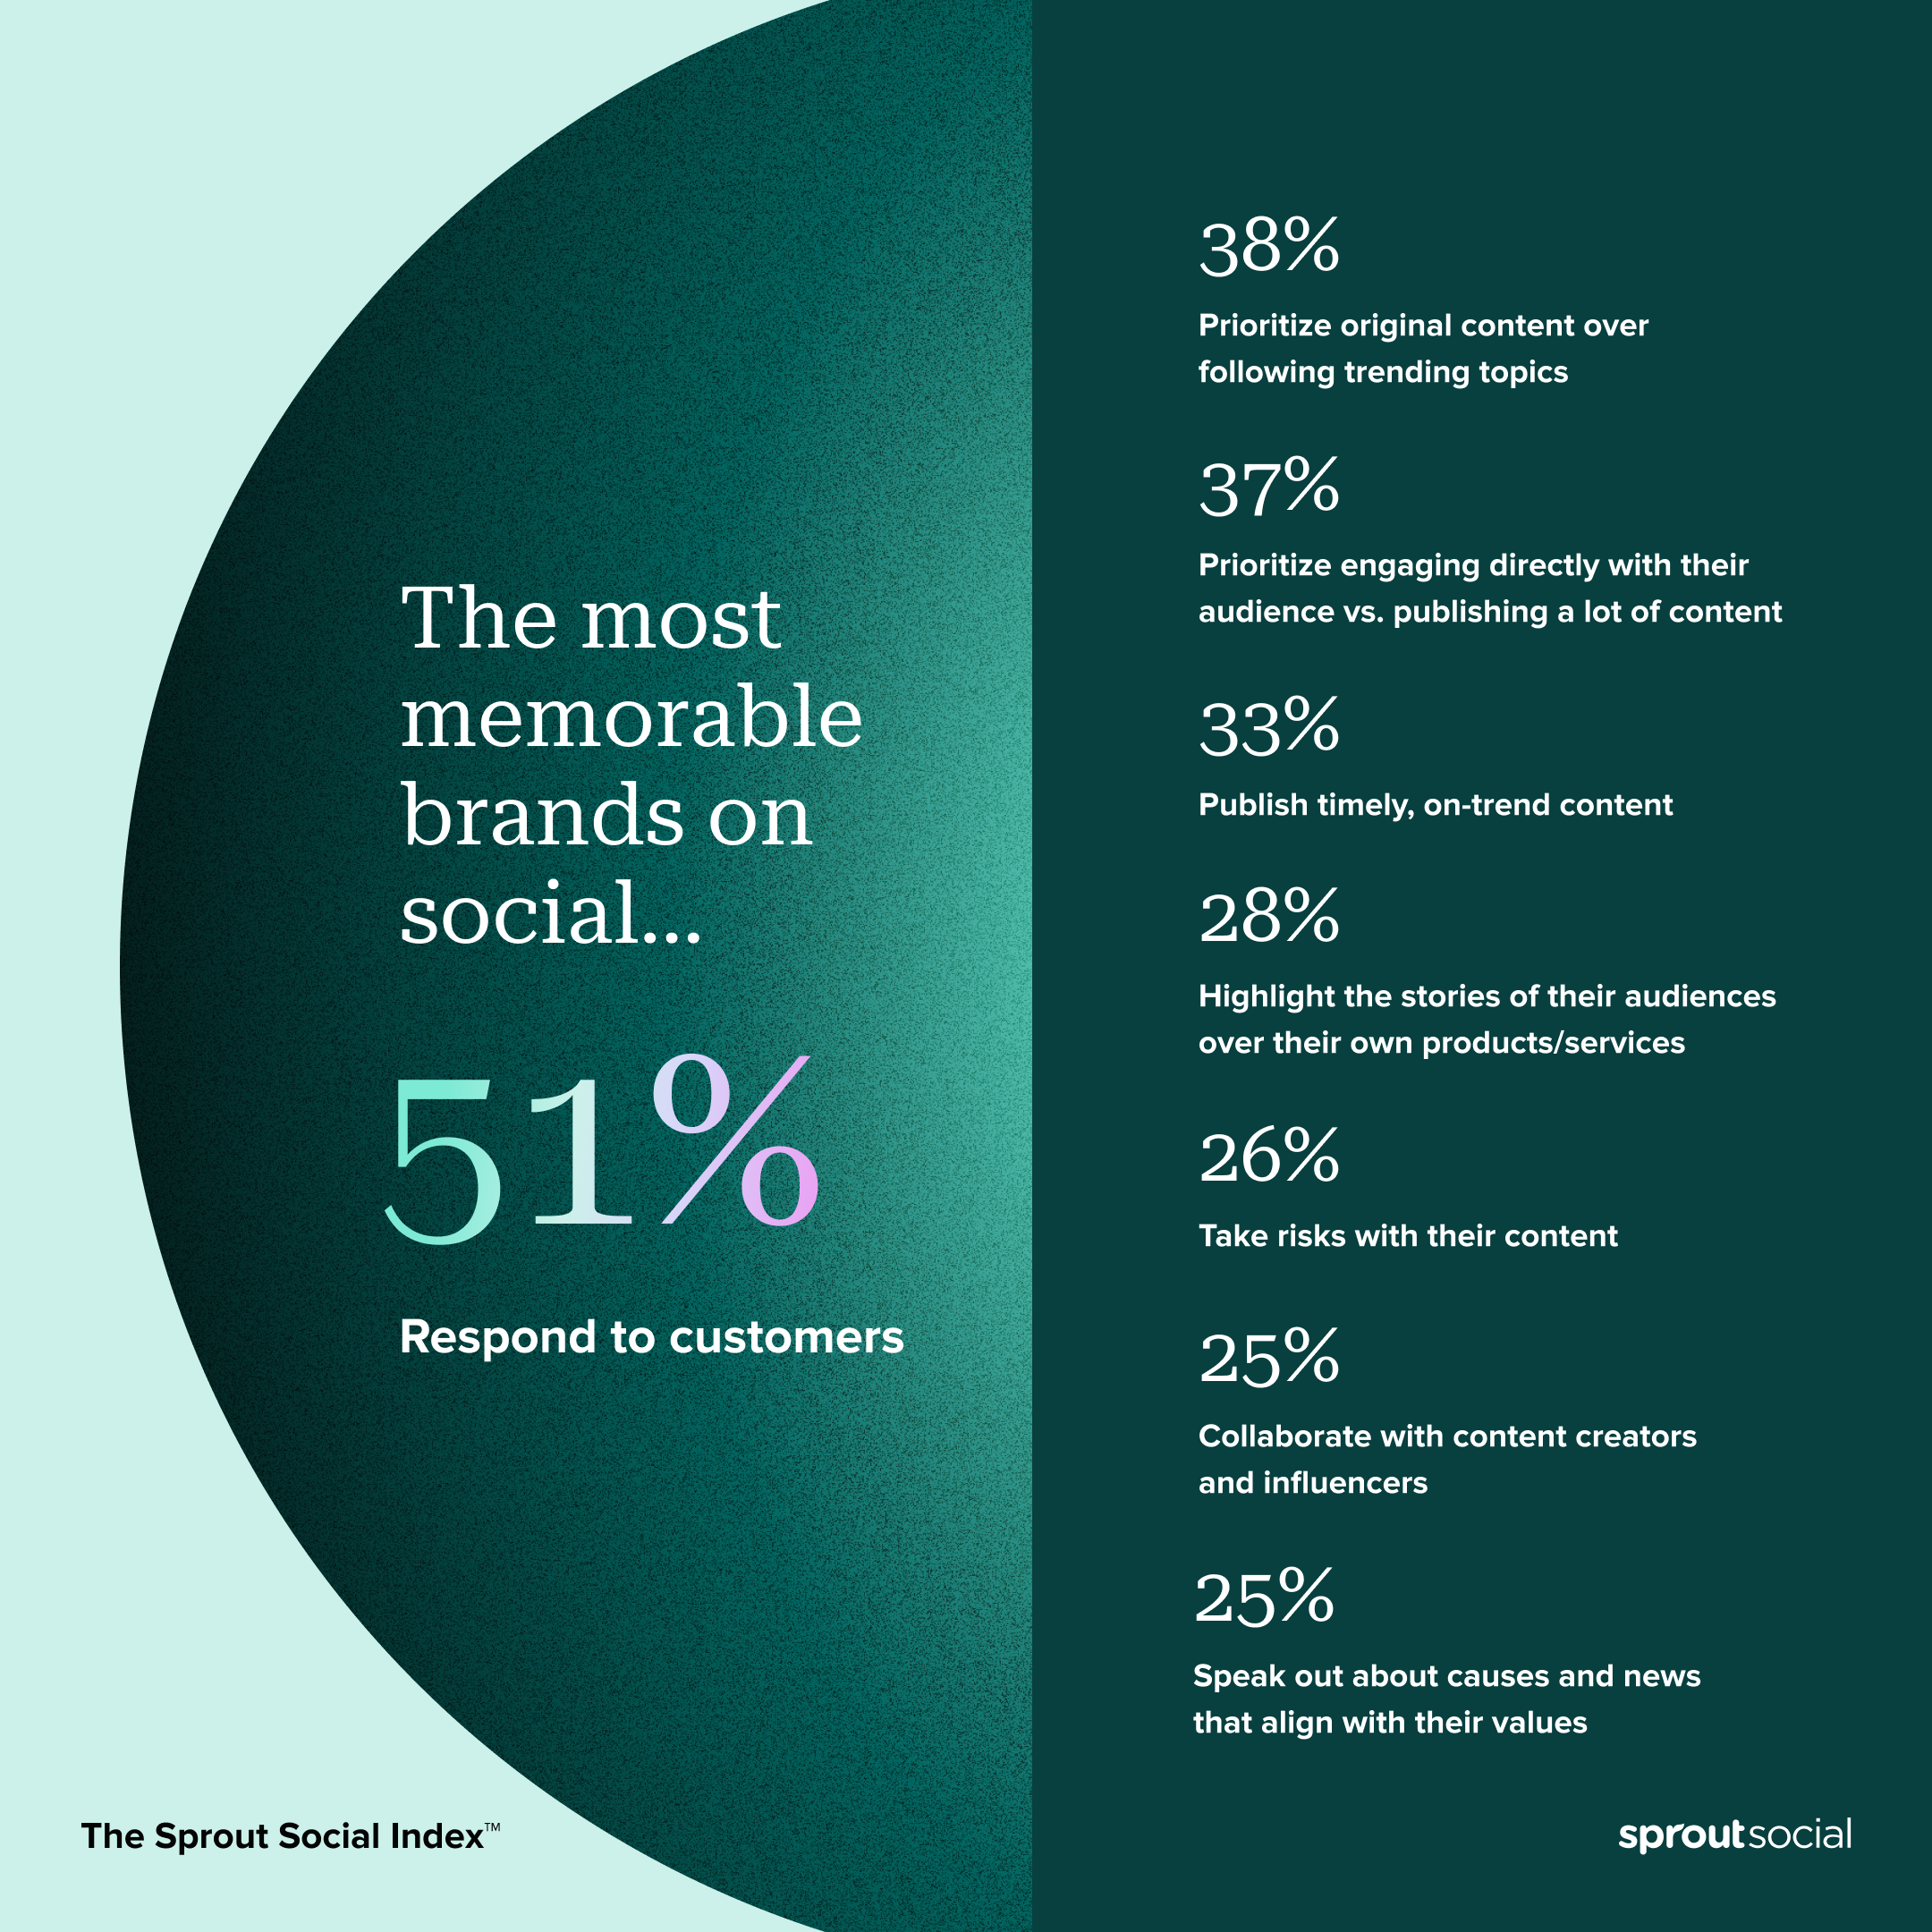 Social media personalization: The opportunity and risks to consider